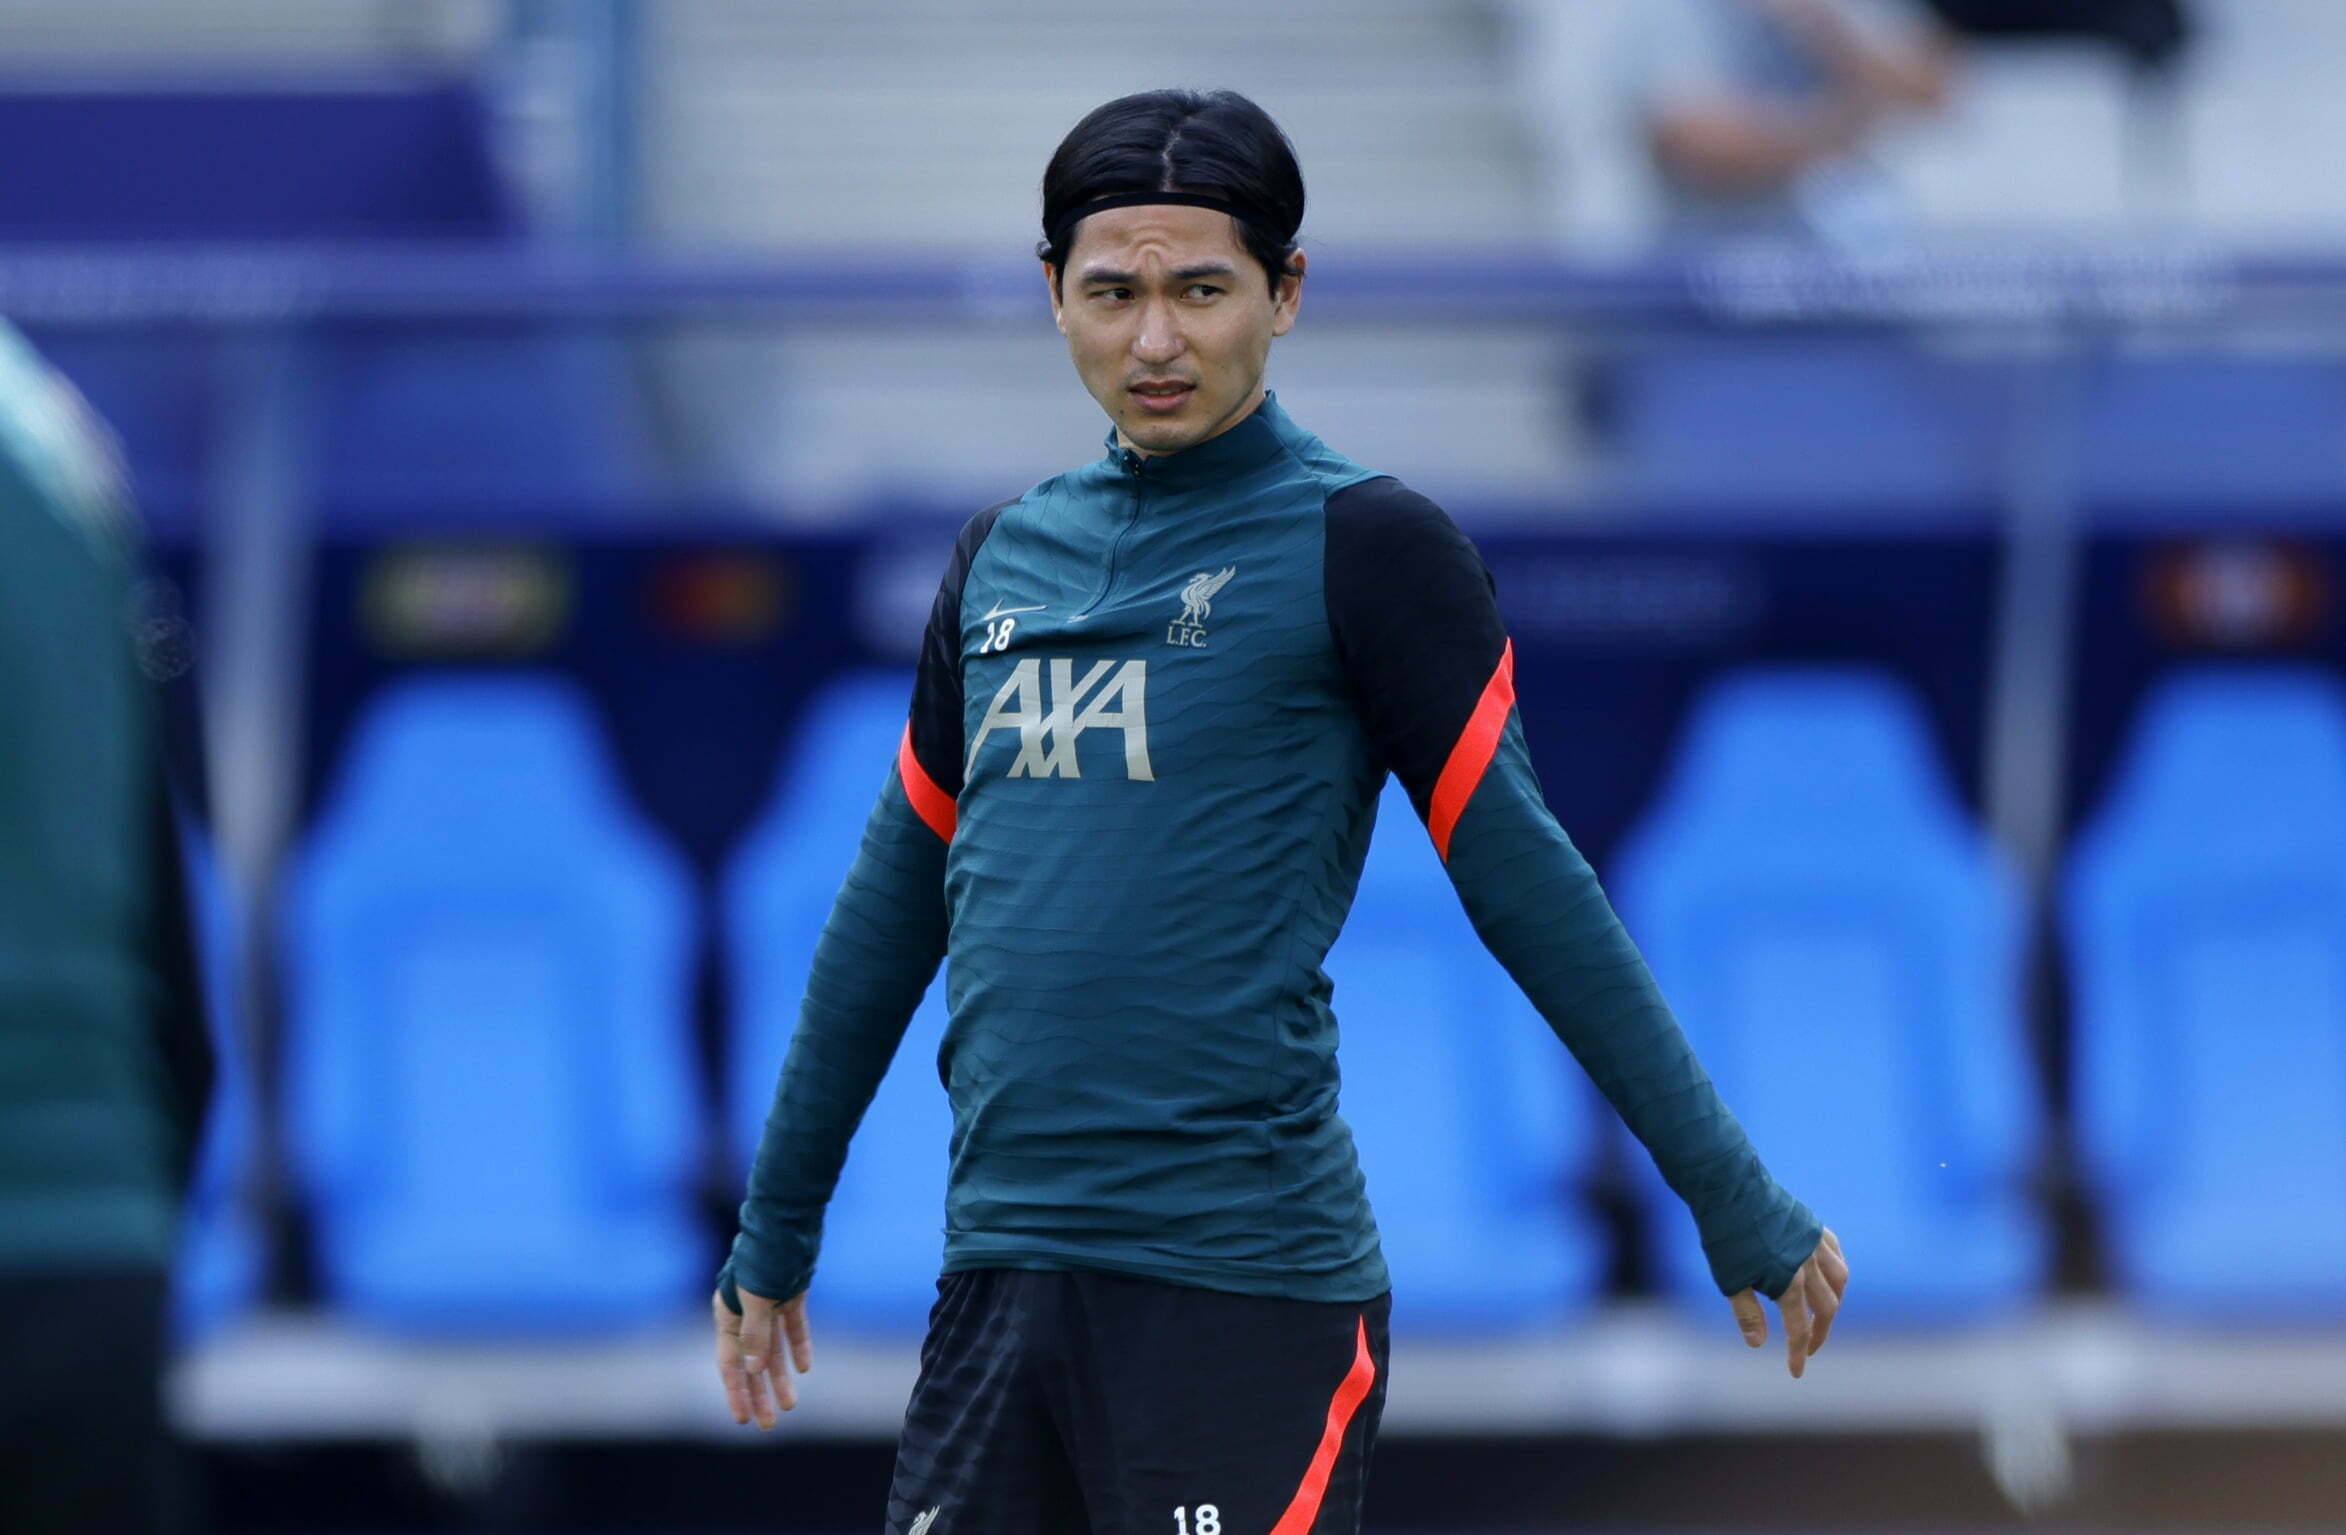 epa09980279 Takummi Minamino of Liverpool attends the team's training session at Stade de France in Saint-Denis, near Paris, France, 27 May 2022. Liverpool FC will face Real Madrid in their UEFA Champions League final on 28 May 2022. EPA-EFE/YOAN VALAT